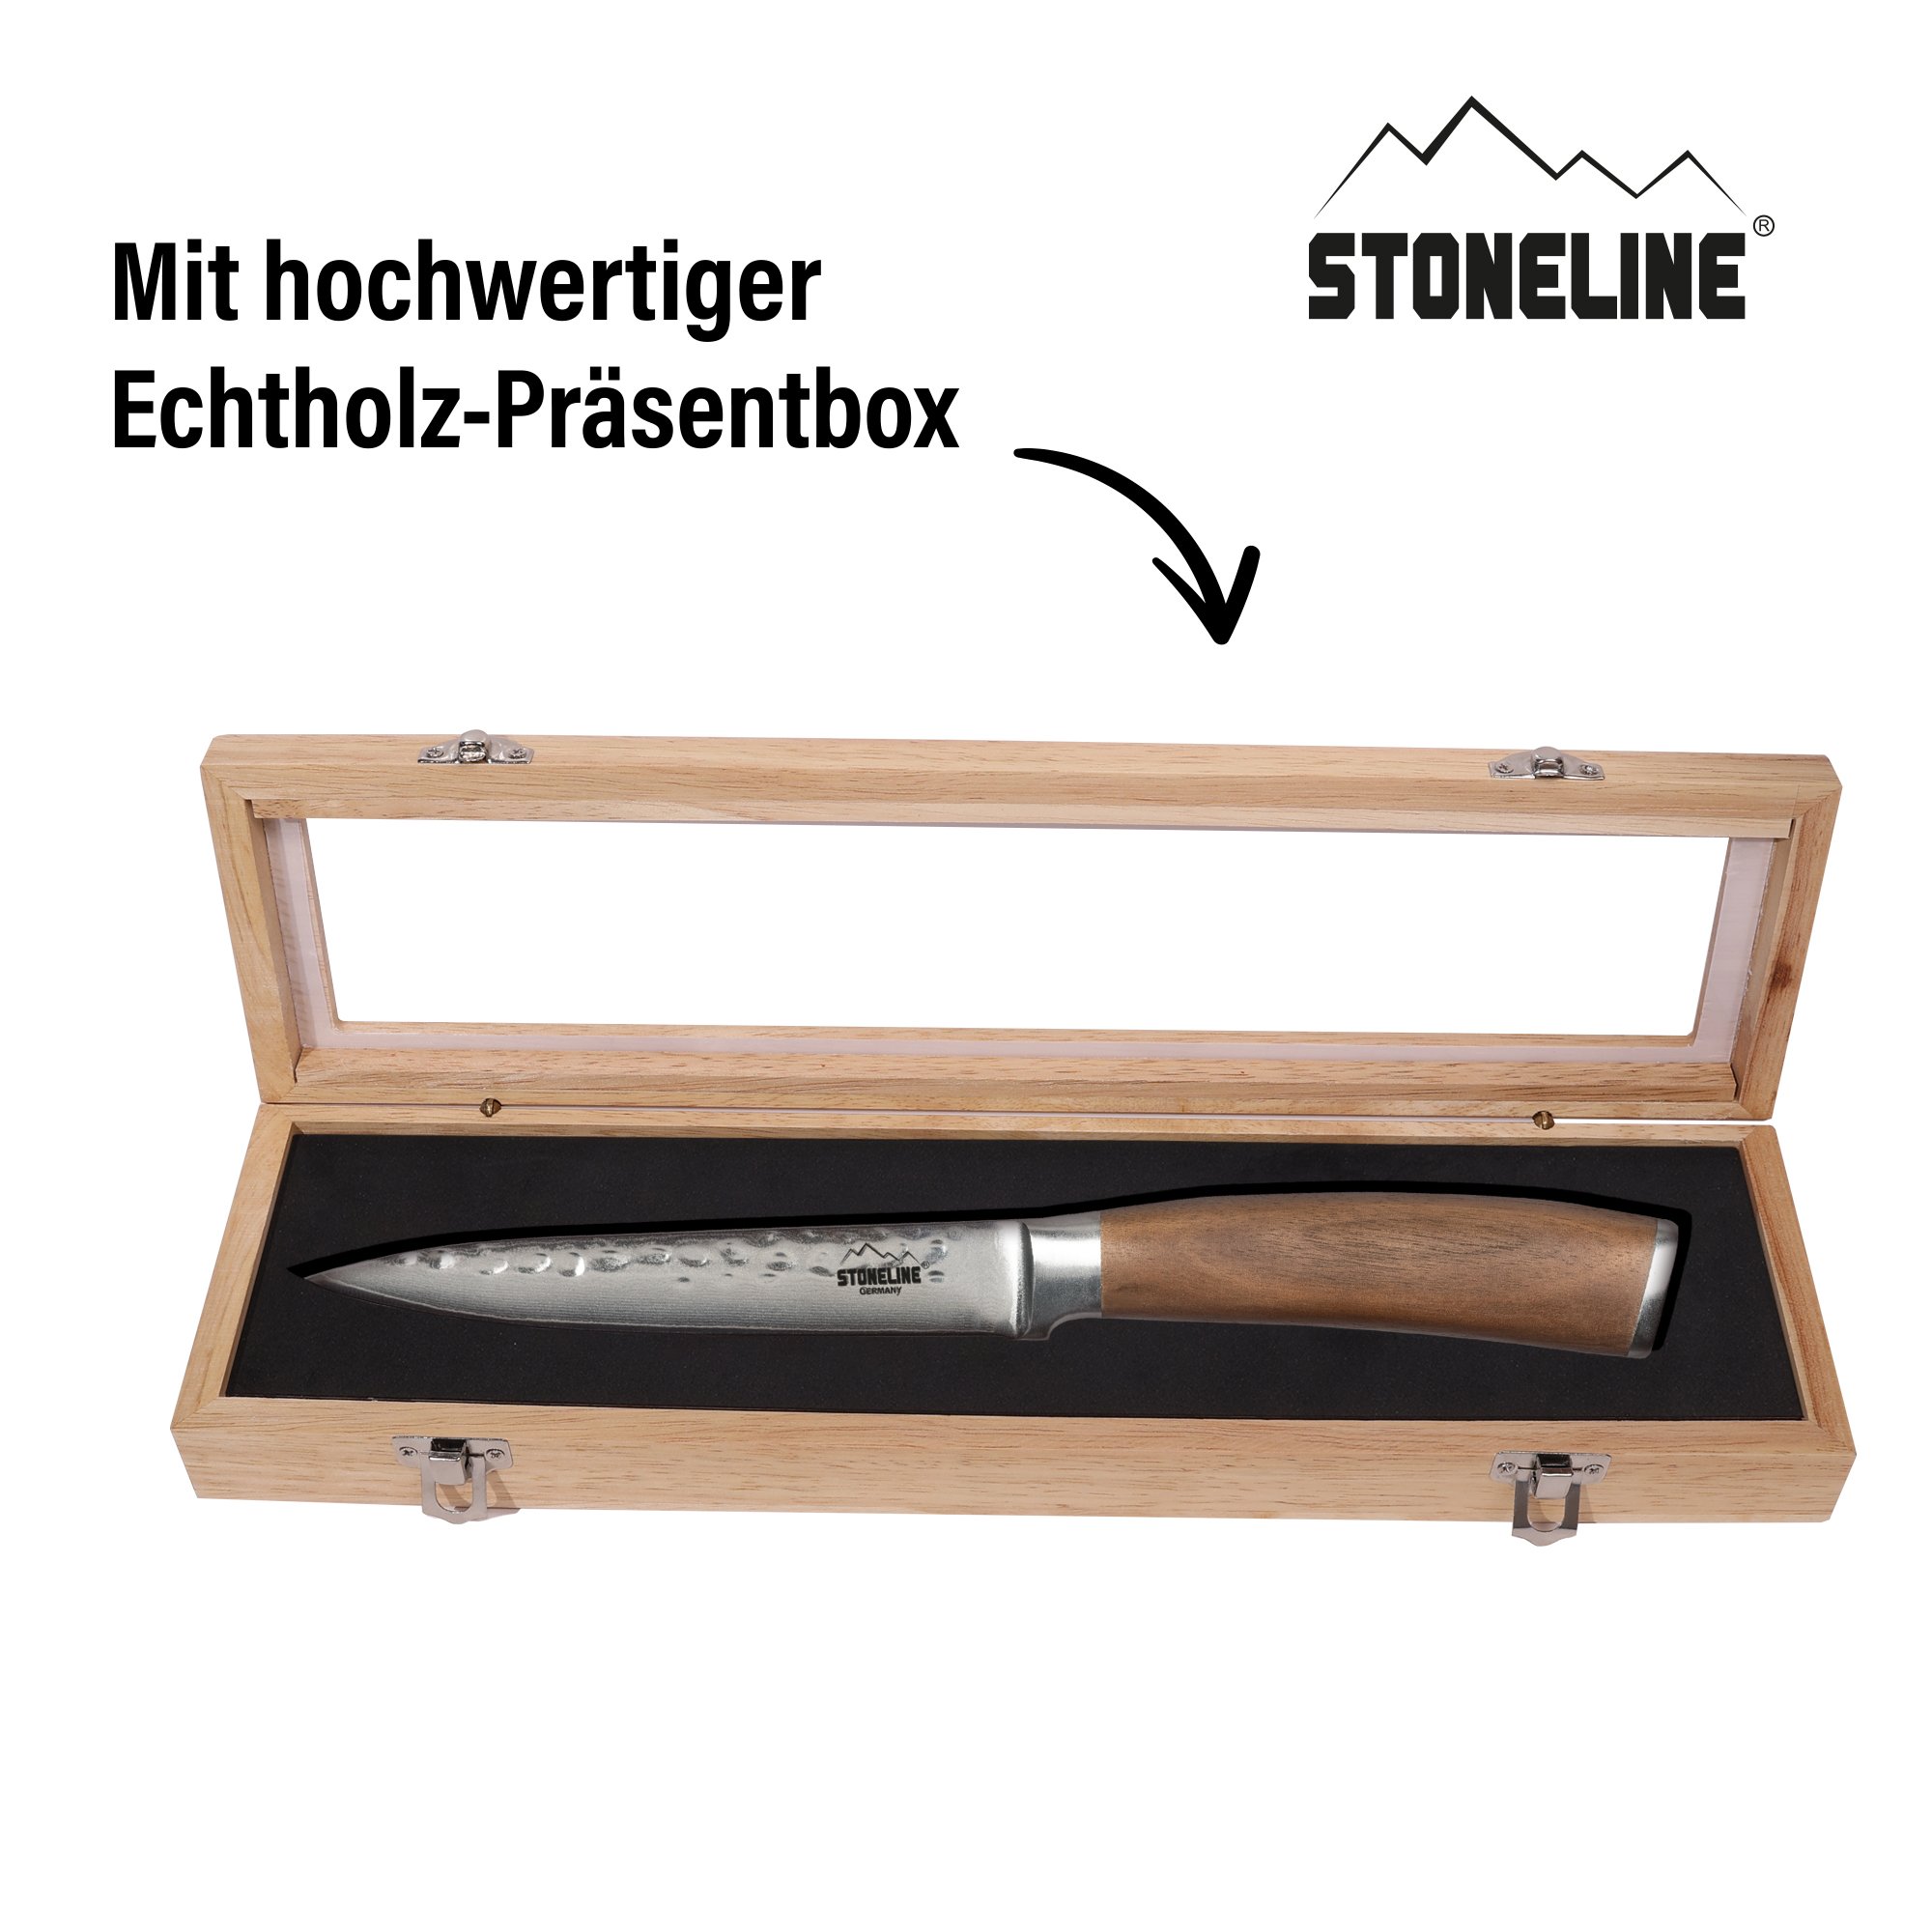 STONELINE® Damascus Steel All-Purpose Knife 24 cm, Hammered Knife, Wooden Storage Box